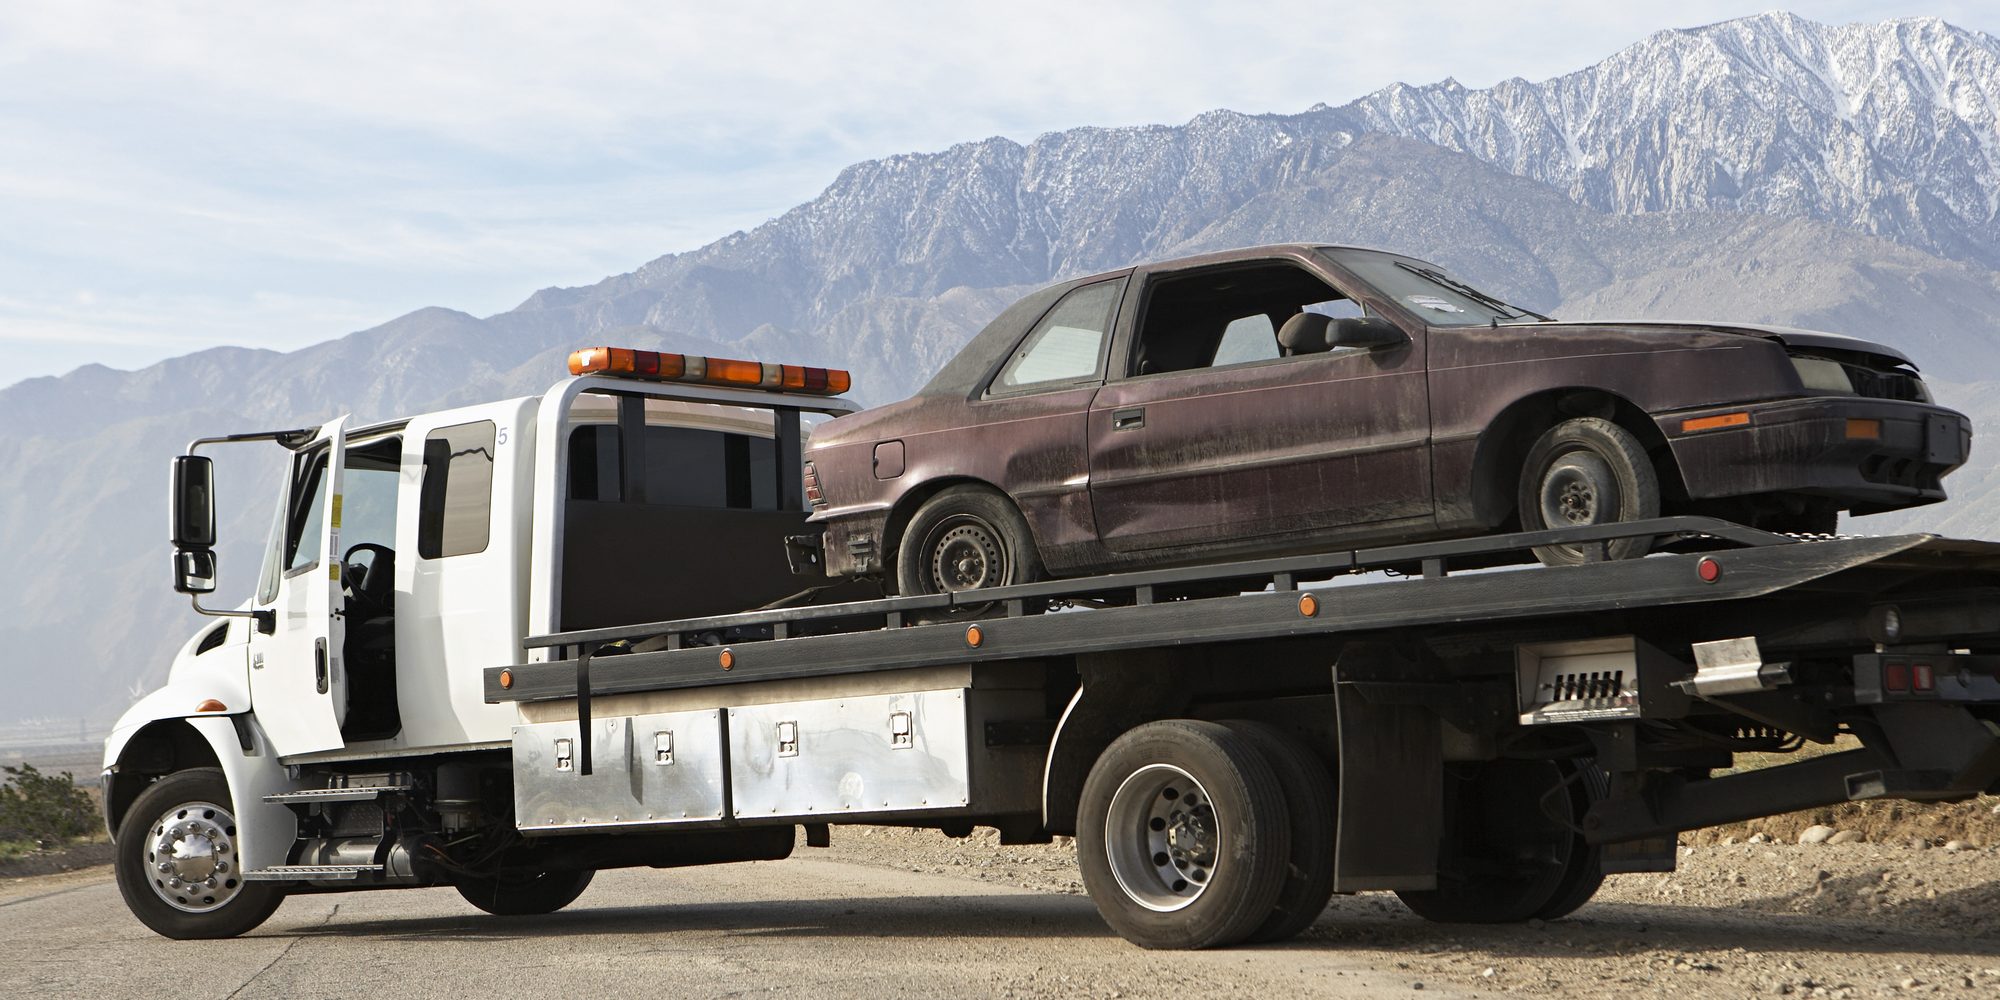 Damaged car on trailer with mountain range in the background